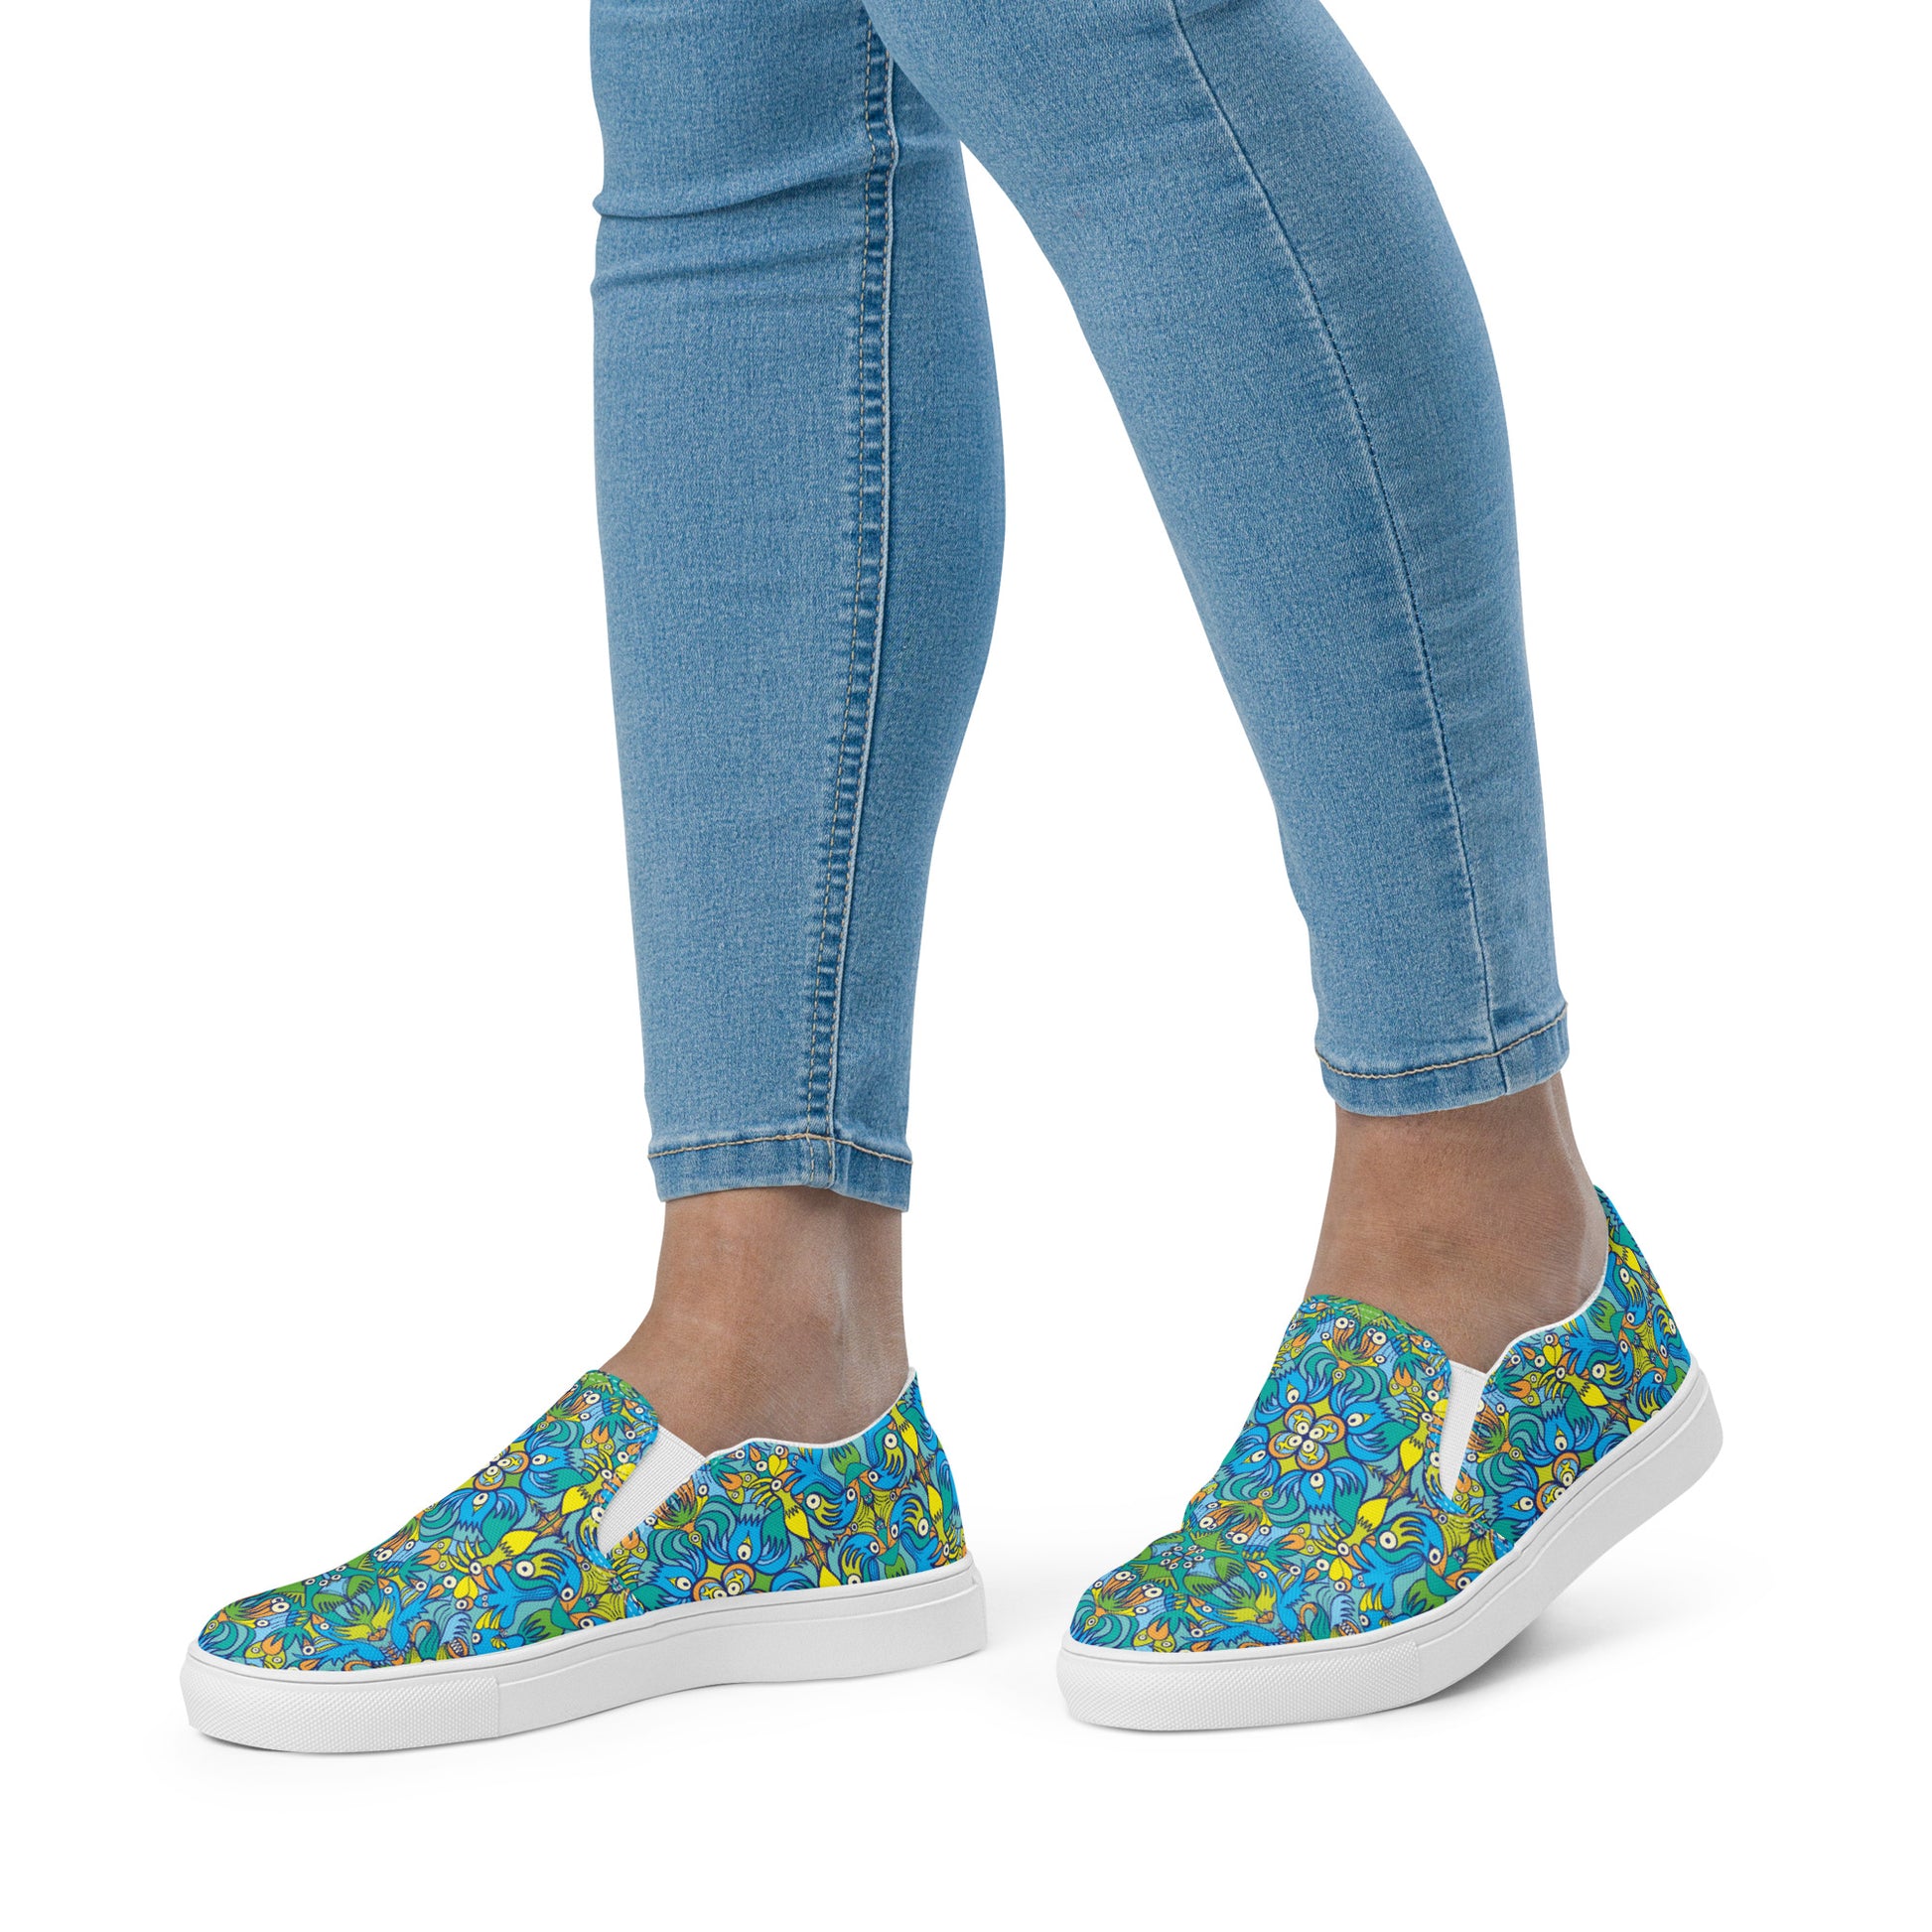 Exotic birds tropical pattern Women’s slip-on canvas shoes. Lifestyle